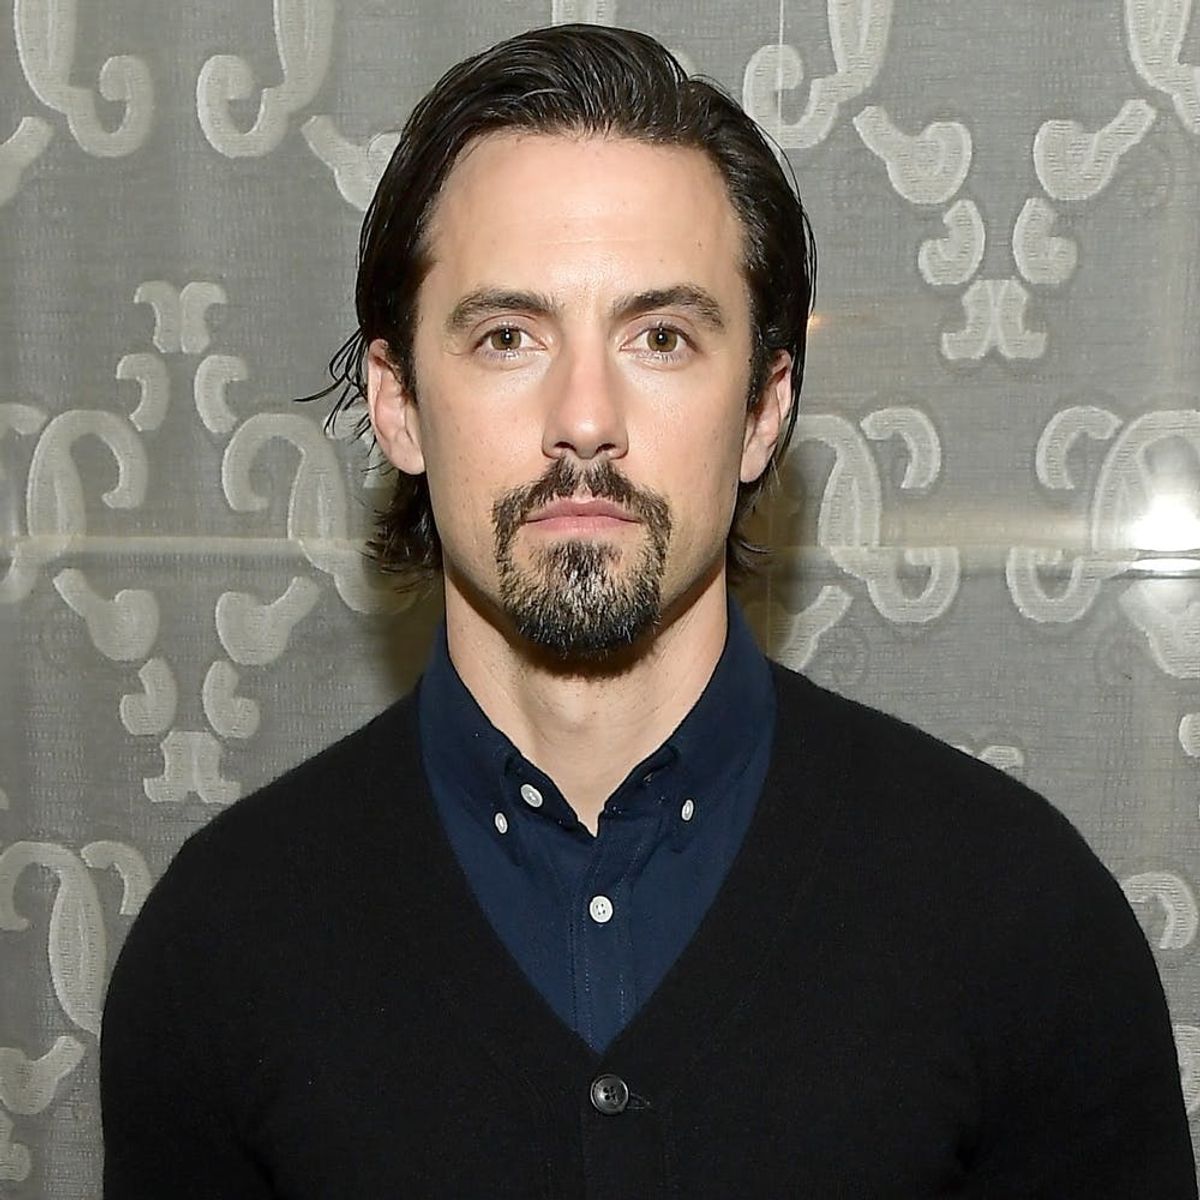 Milo Ventimiglia Will Star Opposite Jennifer Lopez in a New Rom-Com Called “Second Act”